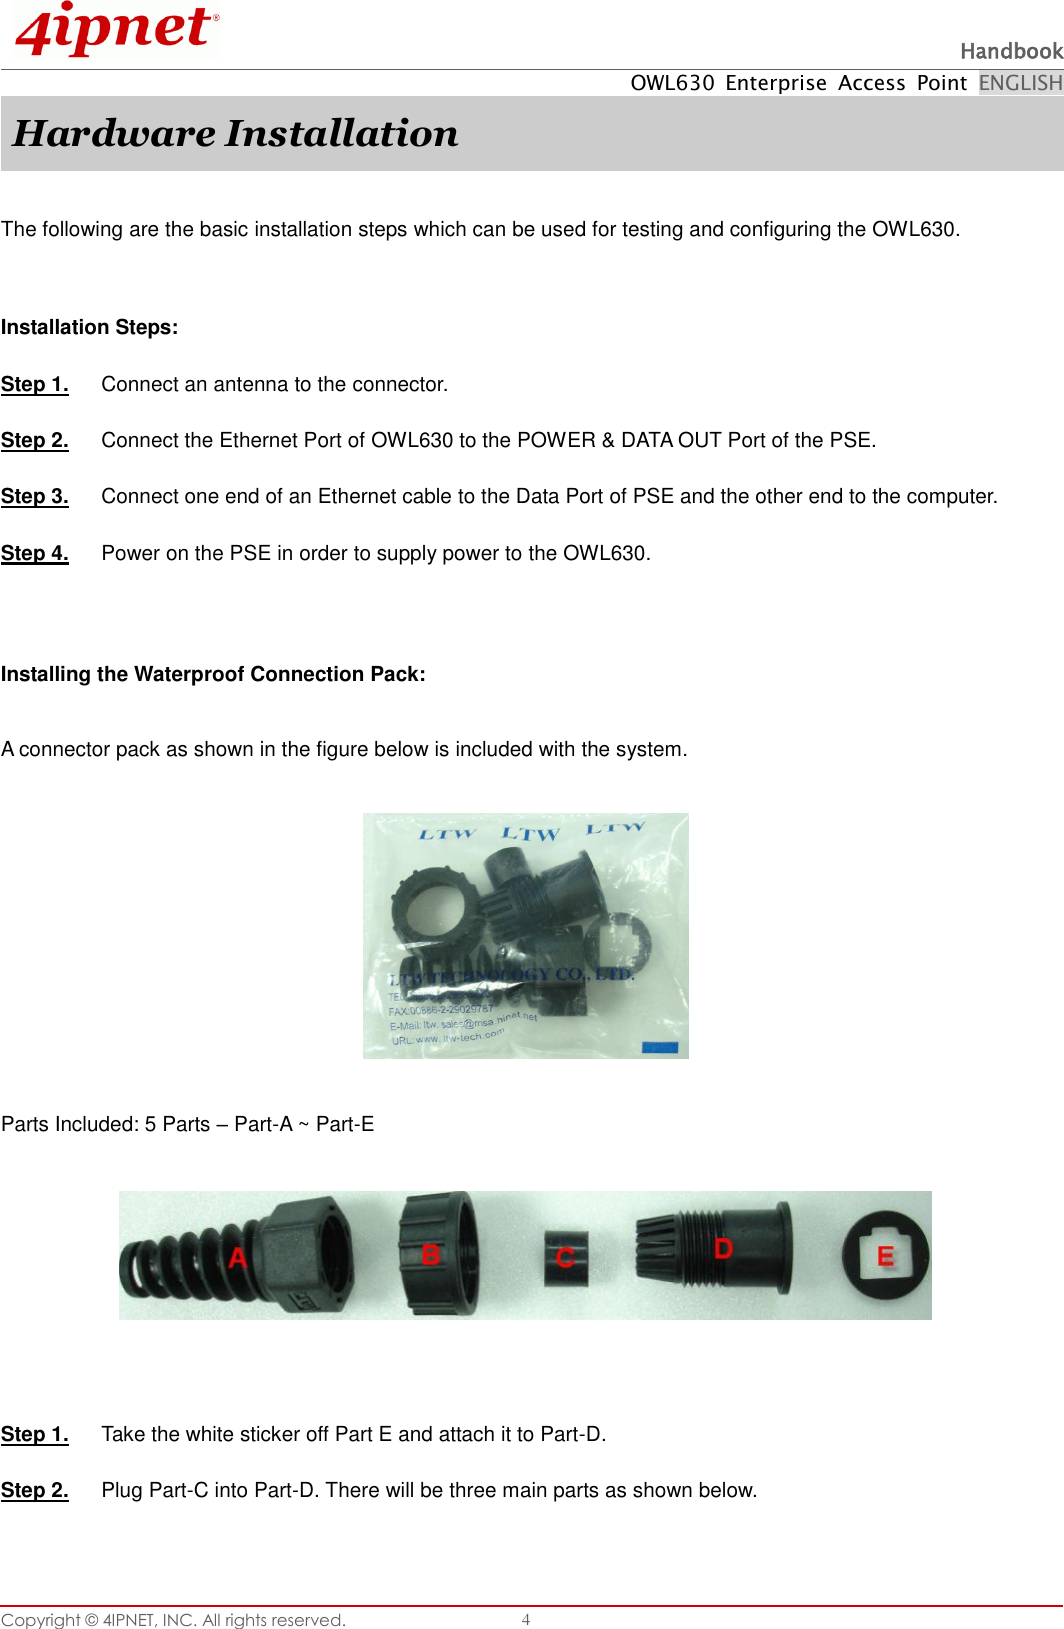  Handbook OWL630  Enterprise  Access  Point  ENGLISH Copyright ©  4IPNET, INC. All rights reserved.   4 Hardware Installation  The following are the basic installation steps which can be used for testing and configuring the OWL630.  Installation Steps: Step 1.  Connect an antenna to the connector. Step 2.  Connect the Ethernet Port of OWL630 to the POWER &amp; DATA OUT Port of the PSE. Step 3.  Connect one end of an Ethernet cable to the Data Port of PSE and the other end to the computer. Step 4.  Power on the PSE in order to supply power to the OWL630.   Installing the Waterproof Connection Pack:  A connector pack as shown in the figure below is included with the system.    Parts Included: 5 Parts – Part-A ~ Part-E     Step 1.  Take the white sticker off Part E and attach it to Part-D. Step 2.  Plug Part-C into Part-D. There will be three main parts as shown below.  